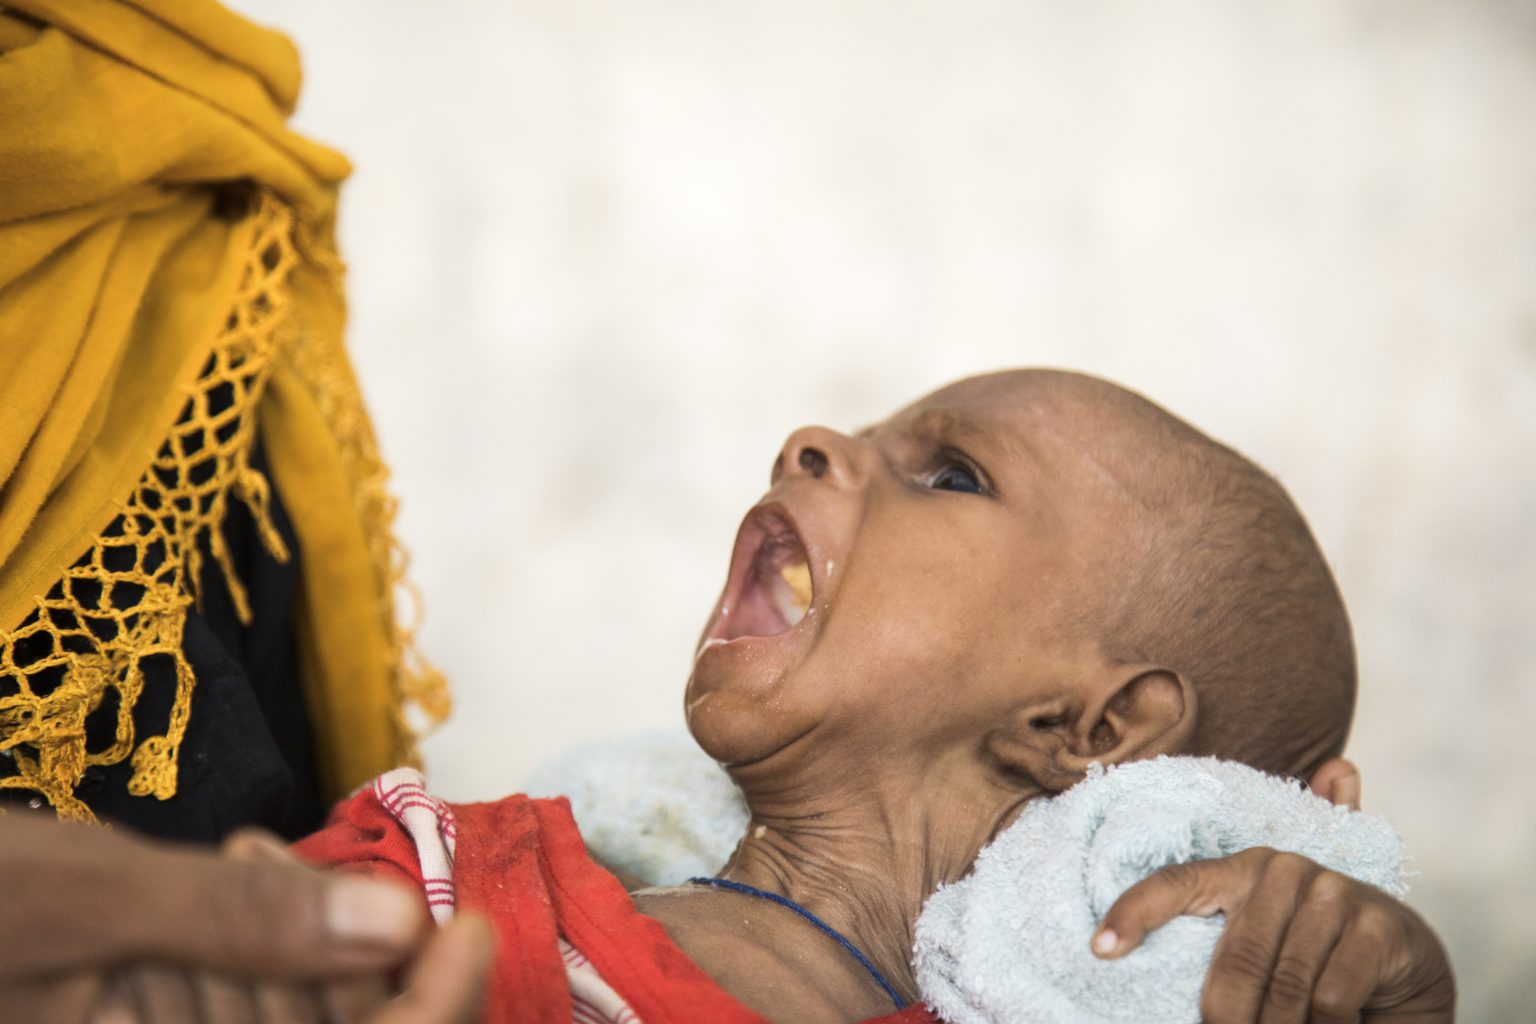 A severely malnourished child cries